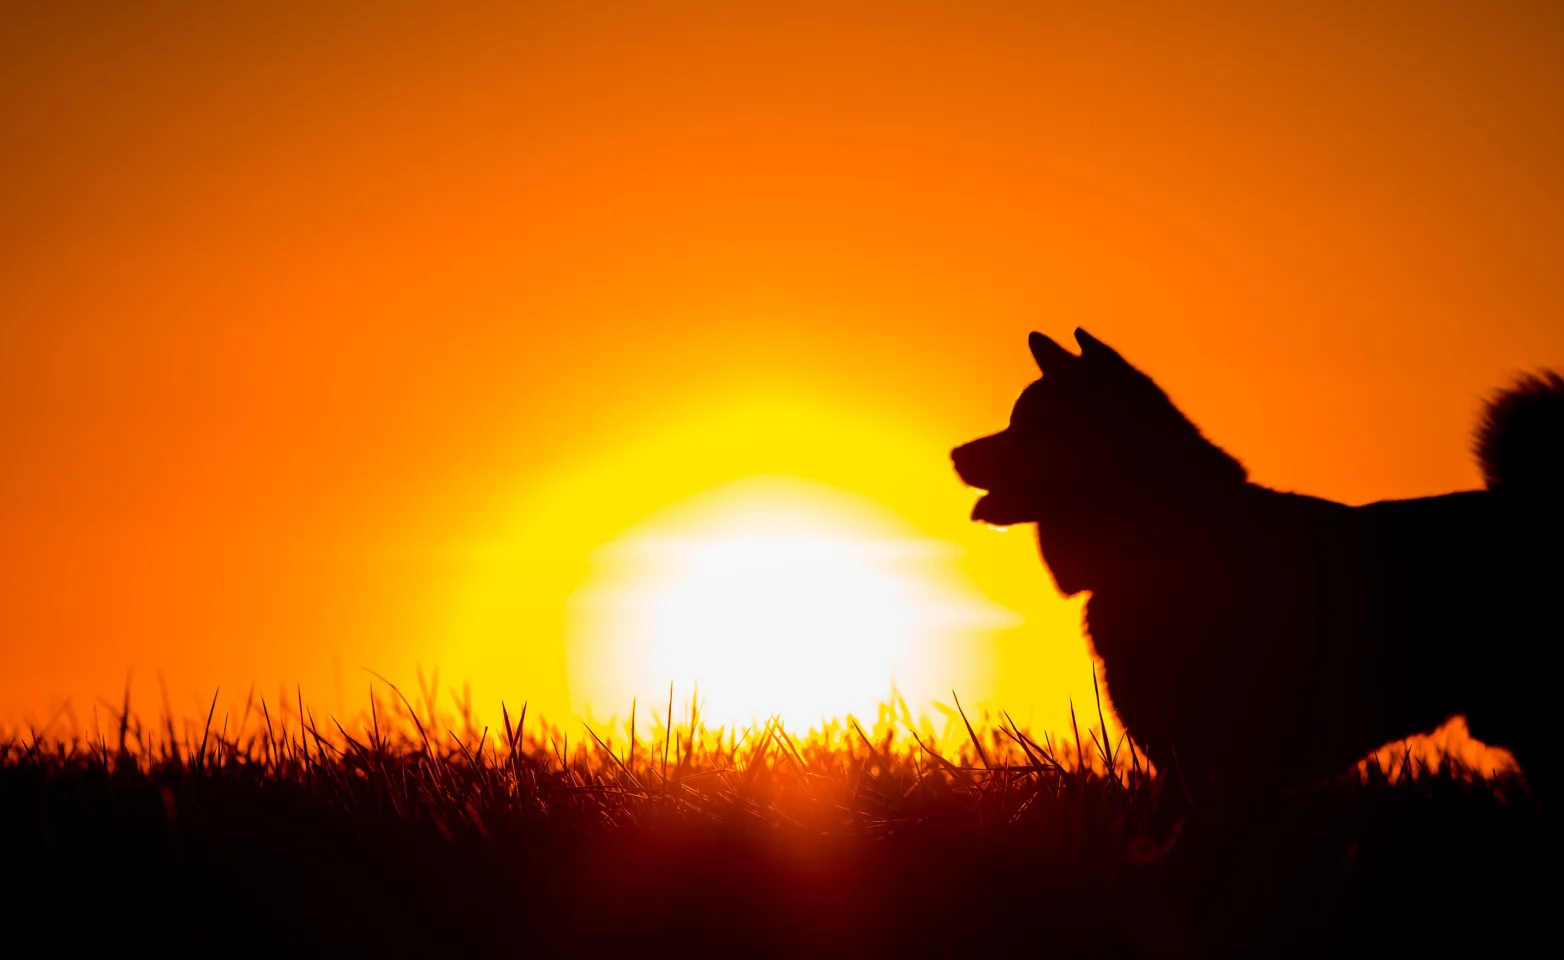 Silhouette of a dog against a sunset